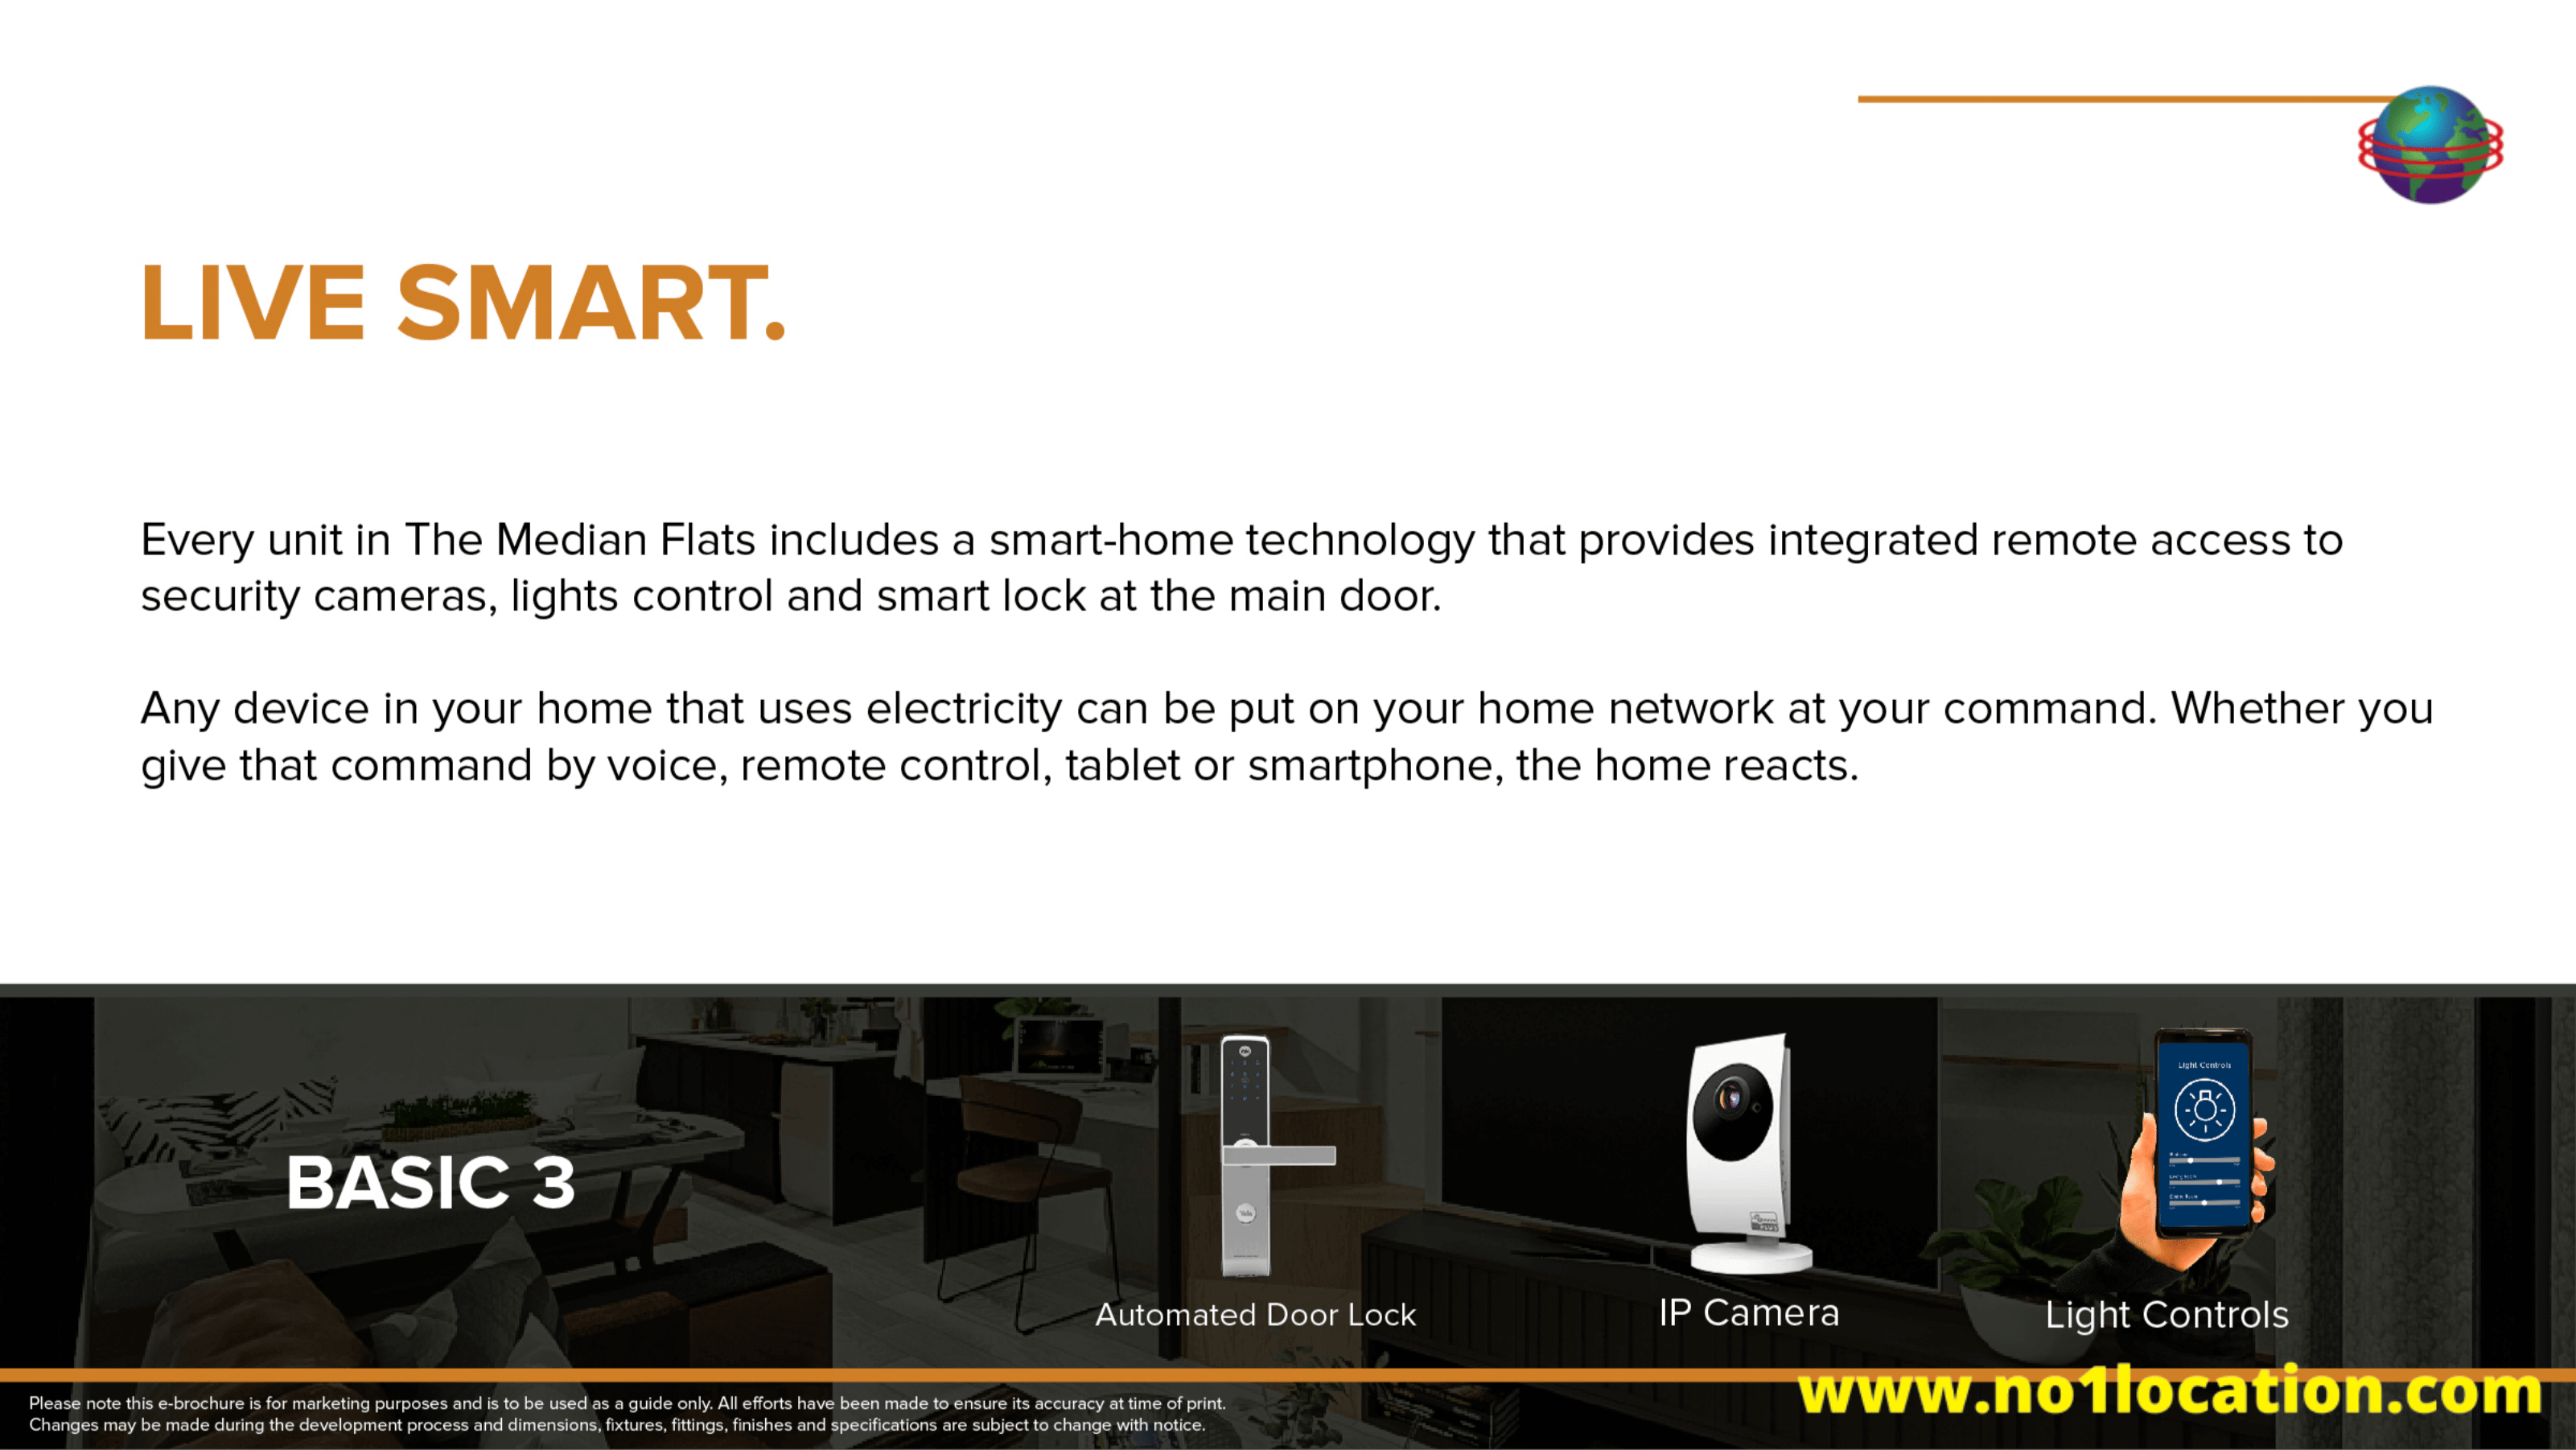 The Median Flats smart home system